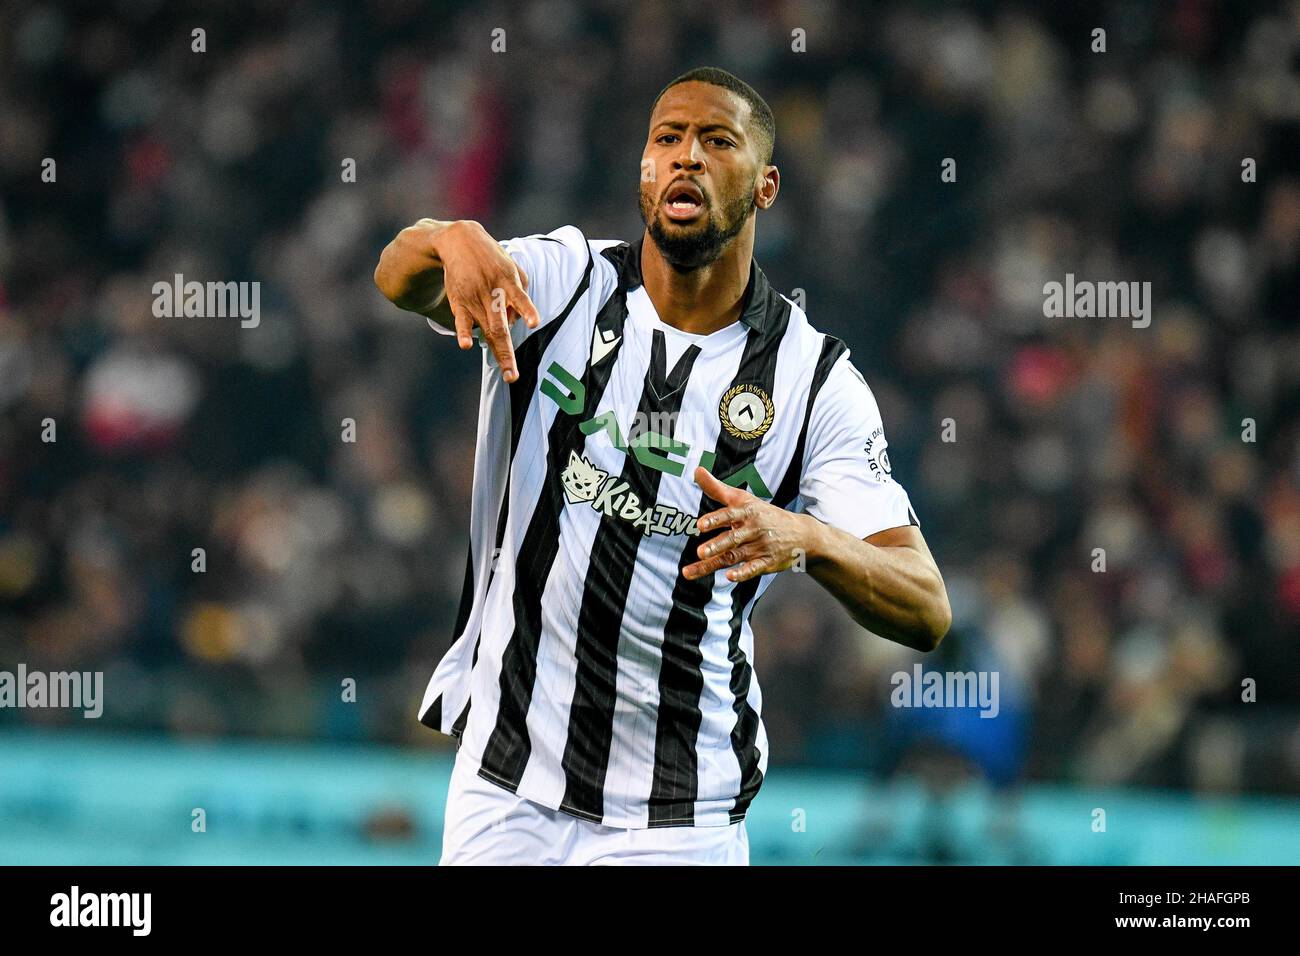 Udine, Italy. 11th Dec, 2021. Udinese's Norberto Bercique Gomes Betuncal portrait celebrating during Udinese Calcio vs AC Milan, italian soccer Serie A match in Udine, Italy, December 11 2021 Credit: Independent Photo Agency/Alamy Live News Stock Photo